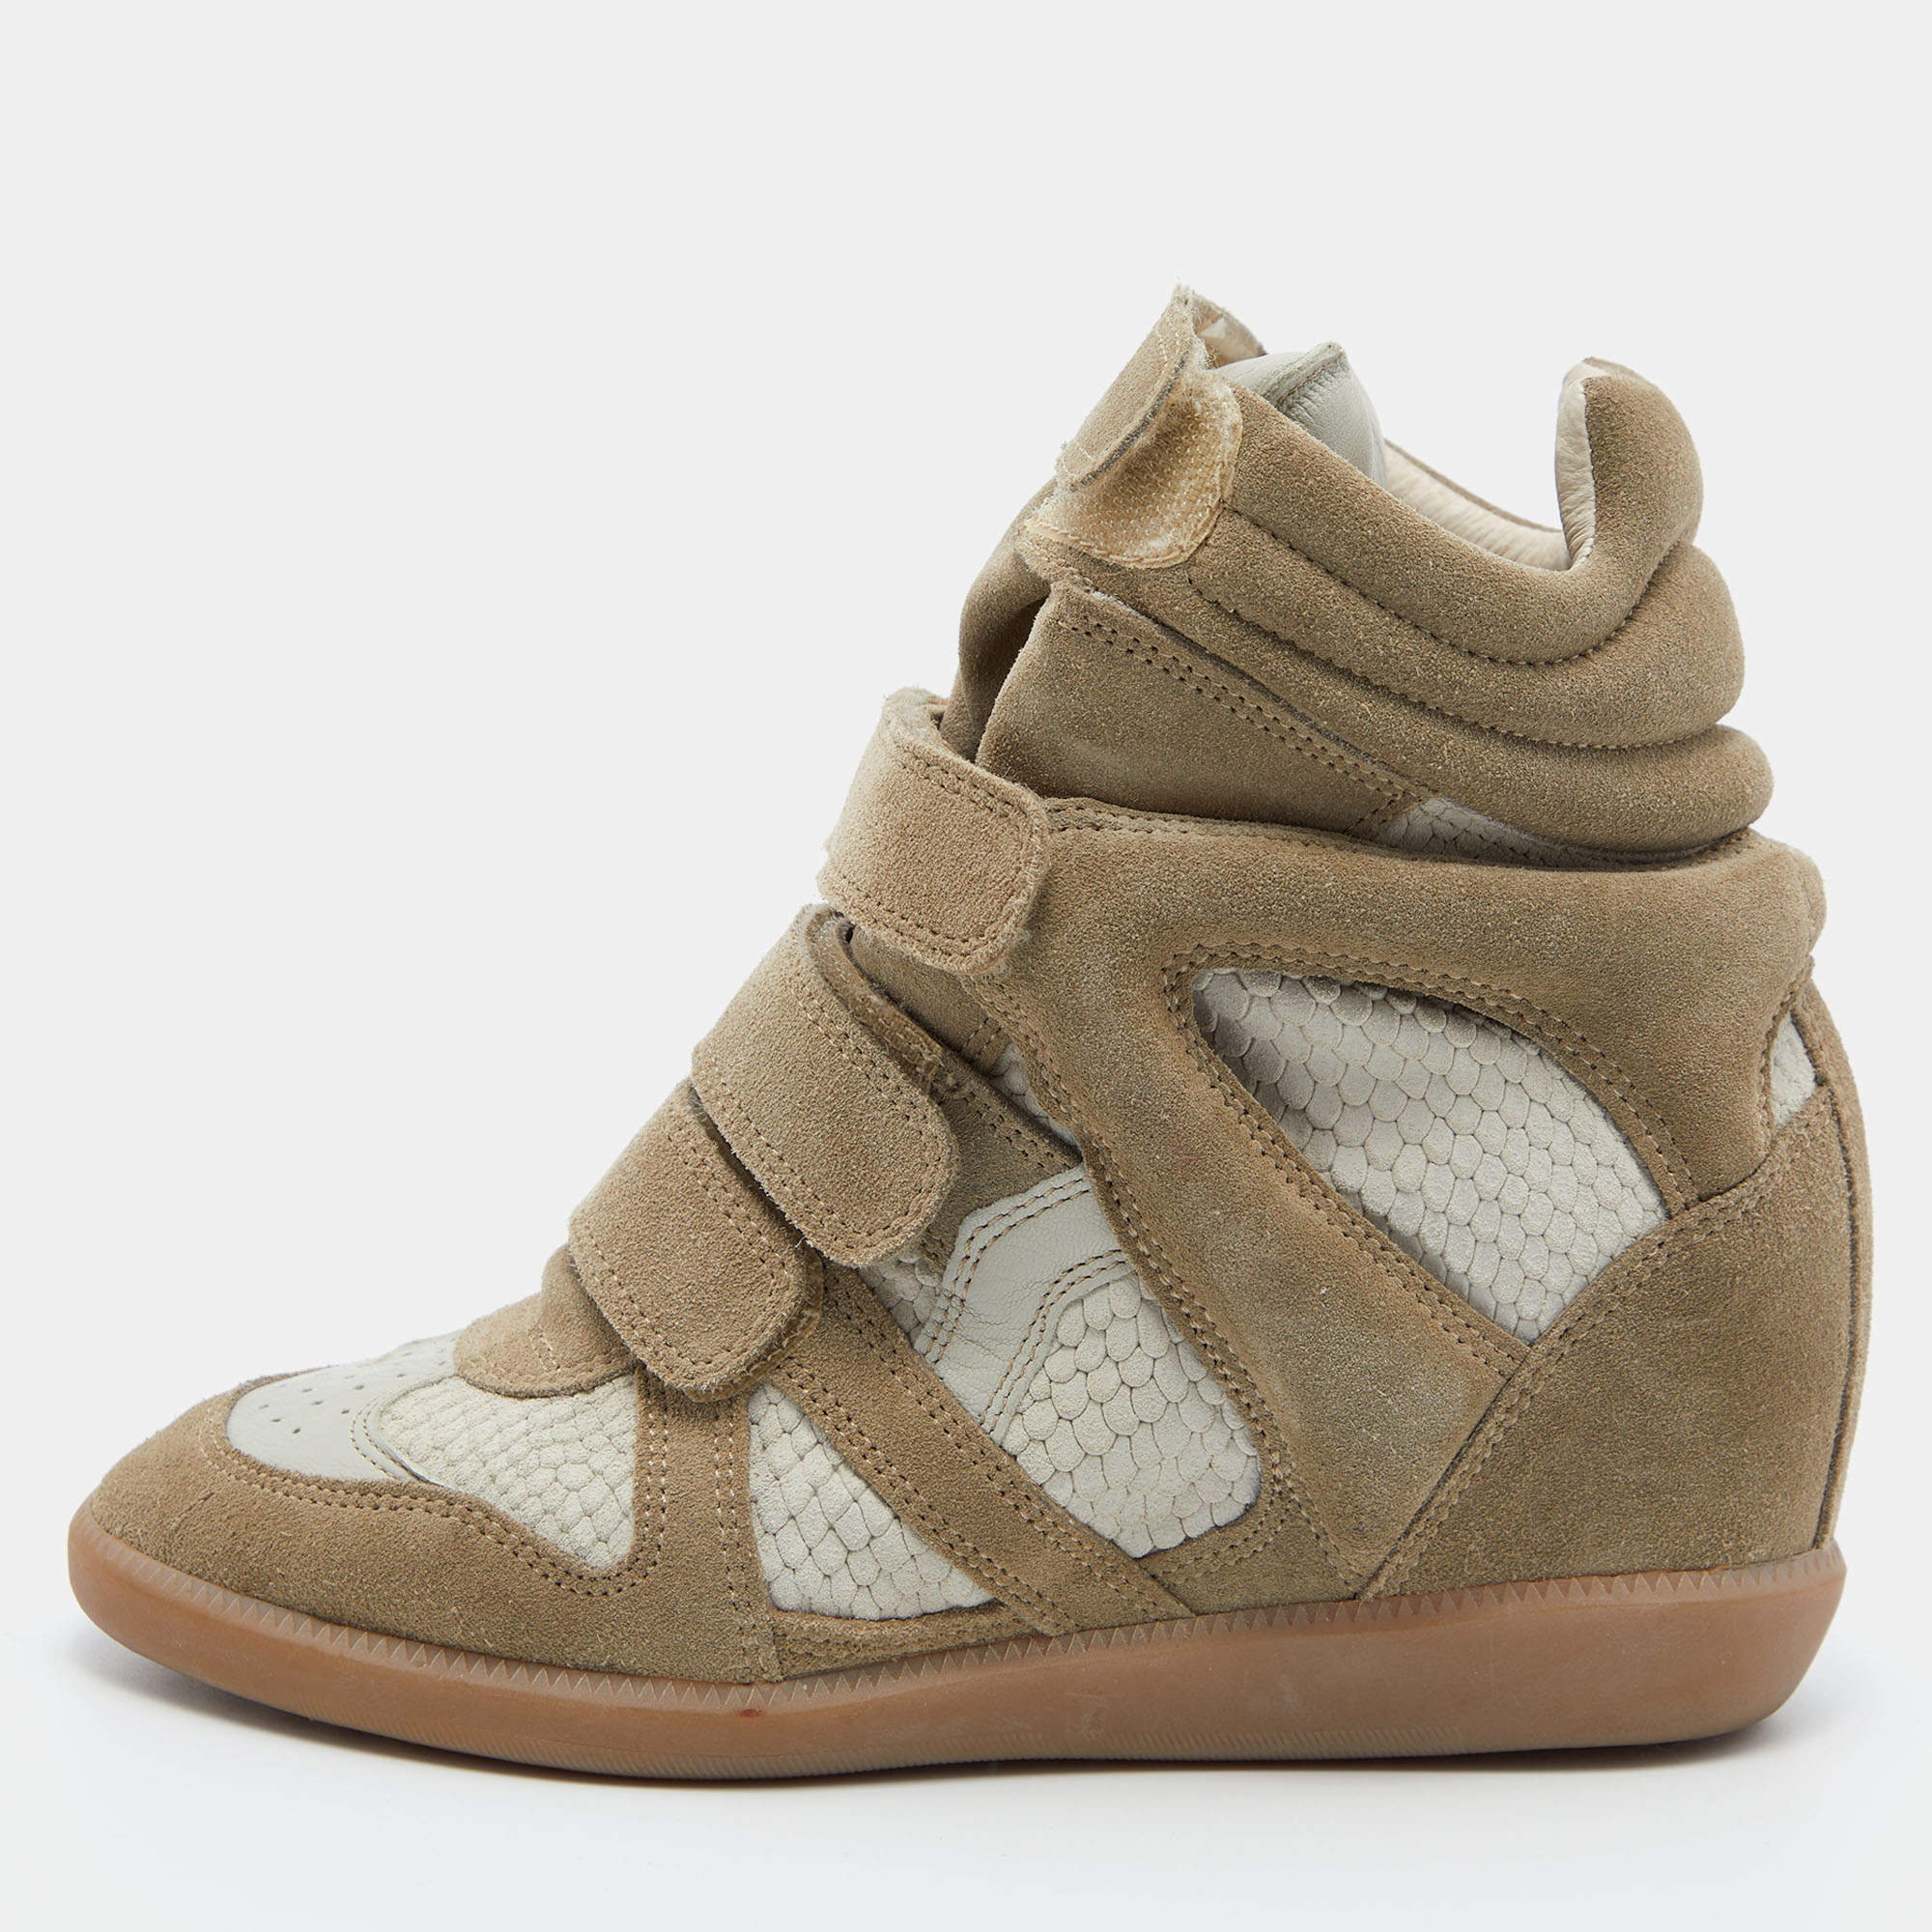 Isabel Marant Beige Leather and Suede Wedge Sneakers 37 Isabel Marant |